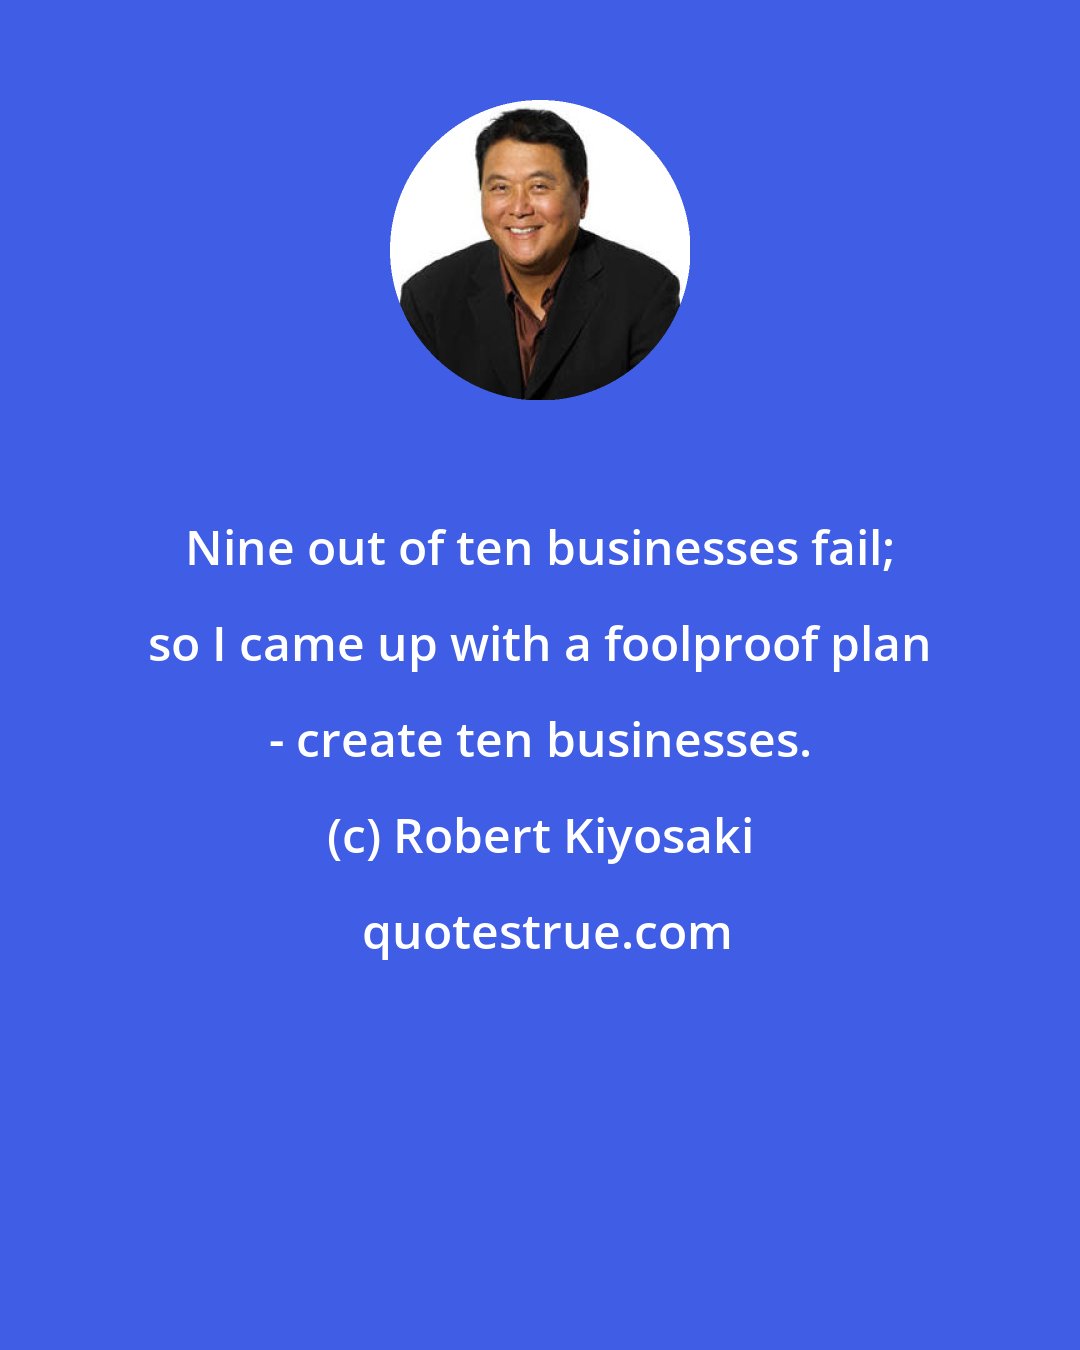 Robert Kiyosaki: Nine out of ten businesses fail; so I came up with a foolproof plan - create ten businesses.